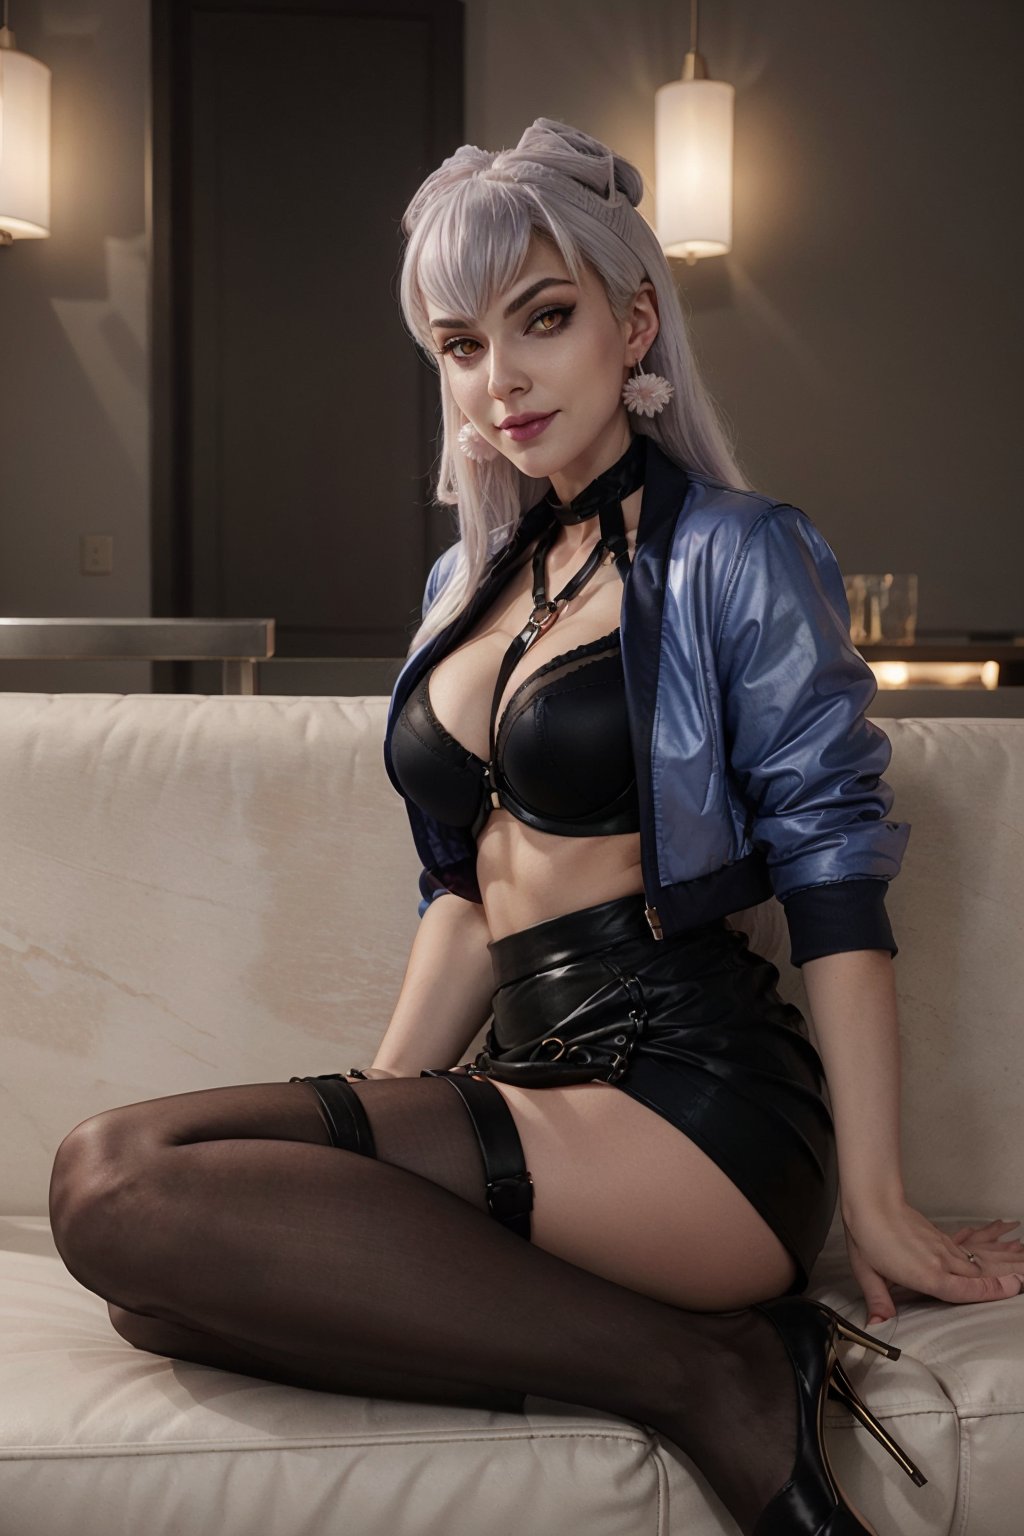 Evekda, white hair, earings, kda attire, black k/da, short blue jacket, bondage bra, skirt, pantyhose, high heels, full body,EVEKDA, perfect light

solo, solo focus, perfect anatomy, ((perfect hands, better hands:1.1)), yellow eyes, sharp jawline, smooth skin, slim body

she is crossing legs,looking perverted, her face look arousedand making a perverted smile, sit on a couch in the strip tease club,kda_evelynn,photorealistic,EVEKDA,